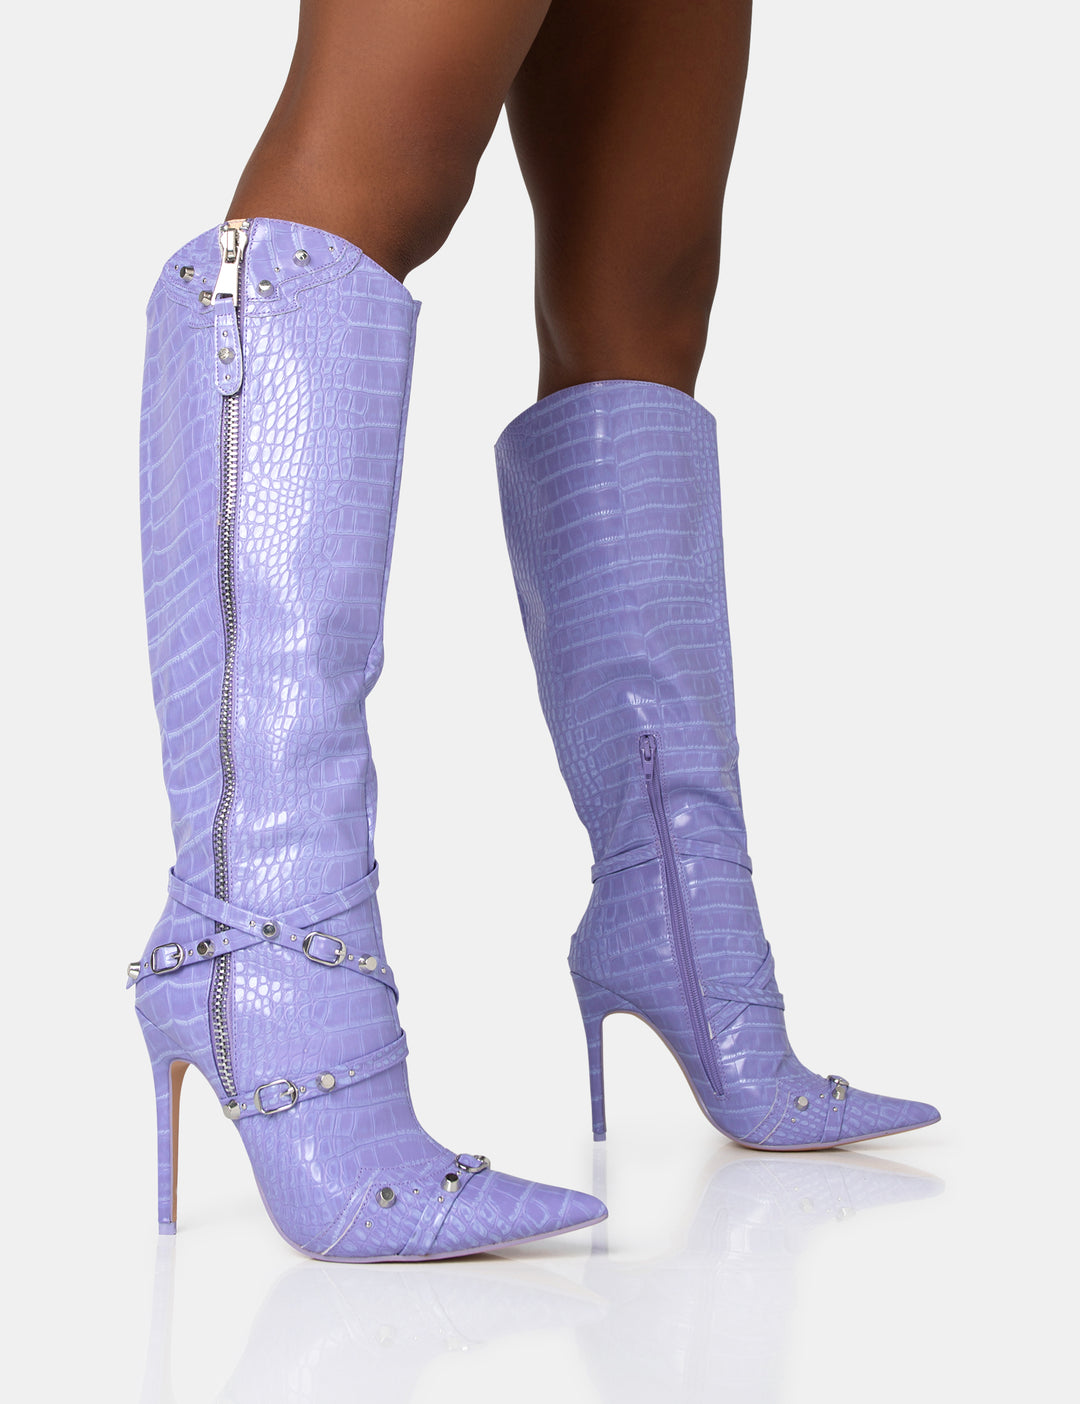 PUBLIC DESIRE WORTHY CROC STUDDED ZIP DETAIL POINTED TOE STILETTO KNEE HIGH BOOTS